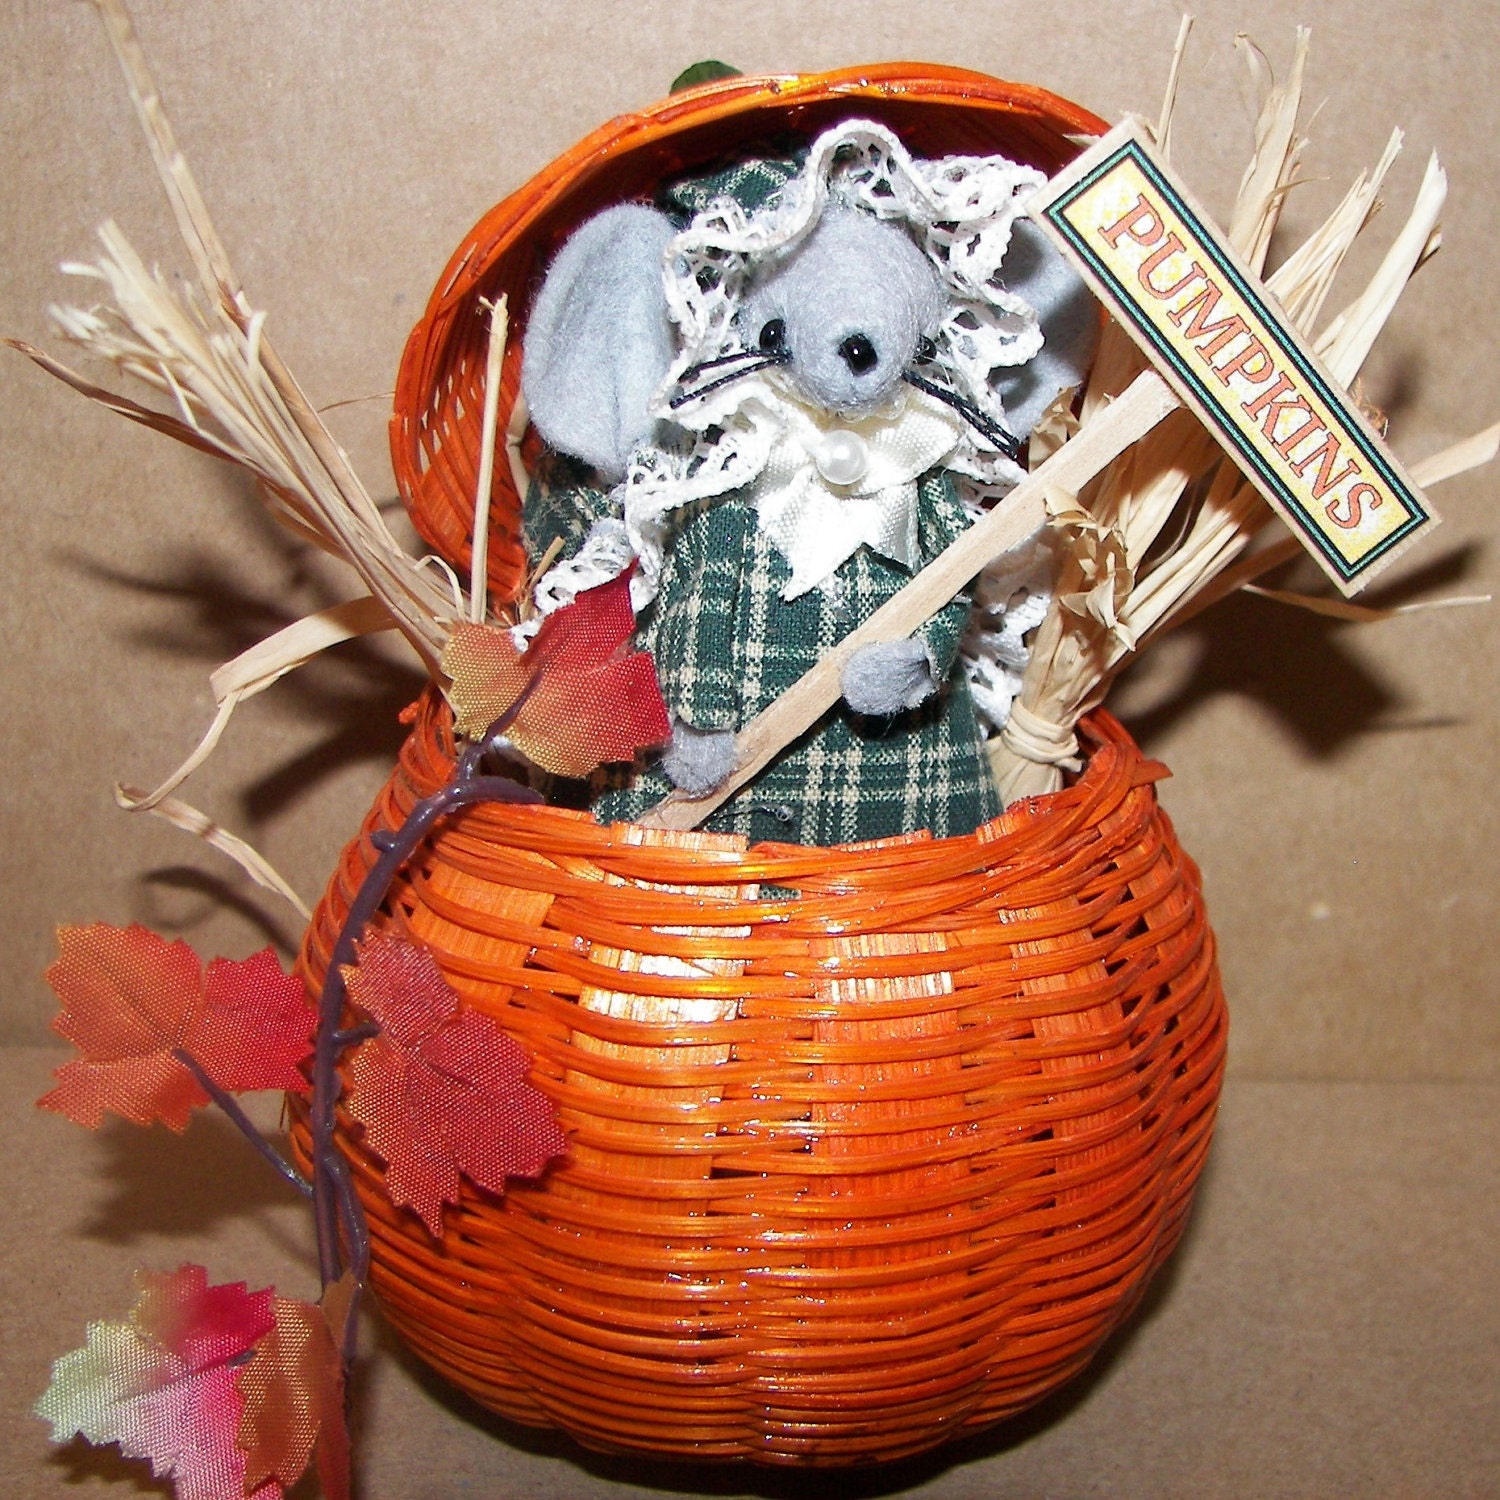 Felt Halloween Mouse in Pumpkin Basket - one of the cute gift mice for animal lovers and collectors by Warmth